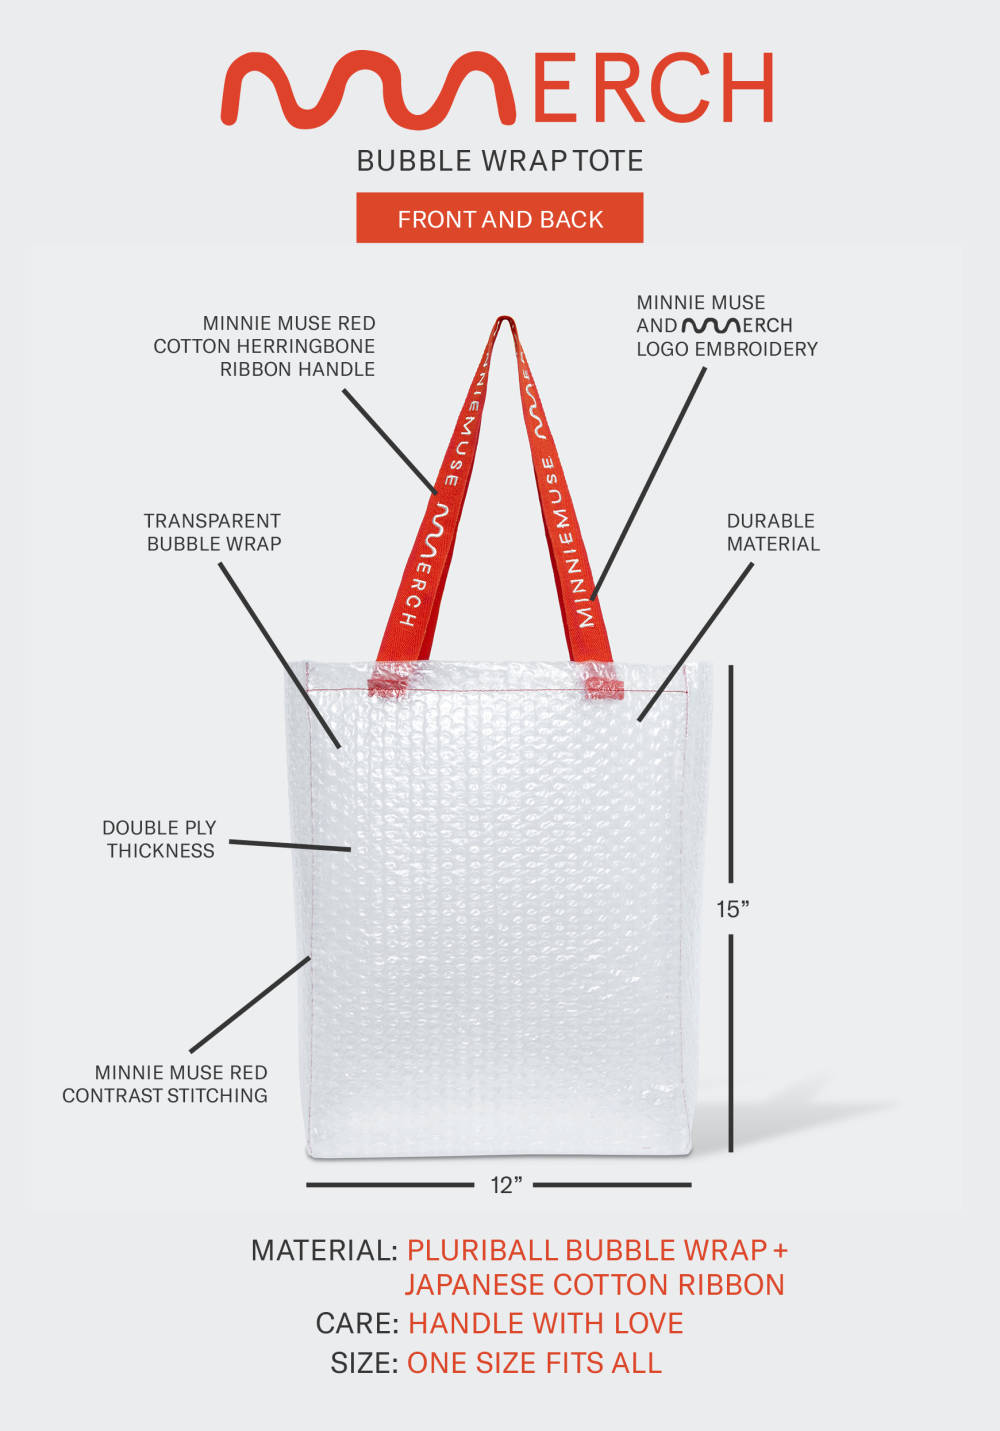  MMerch, Bubble Wrap Tote, Product Card 